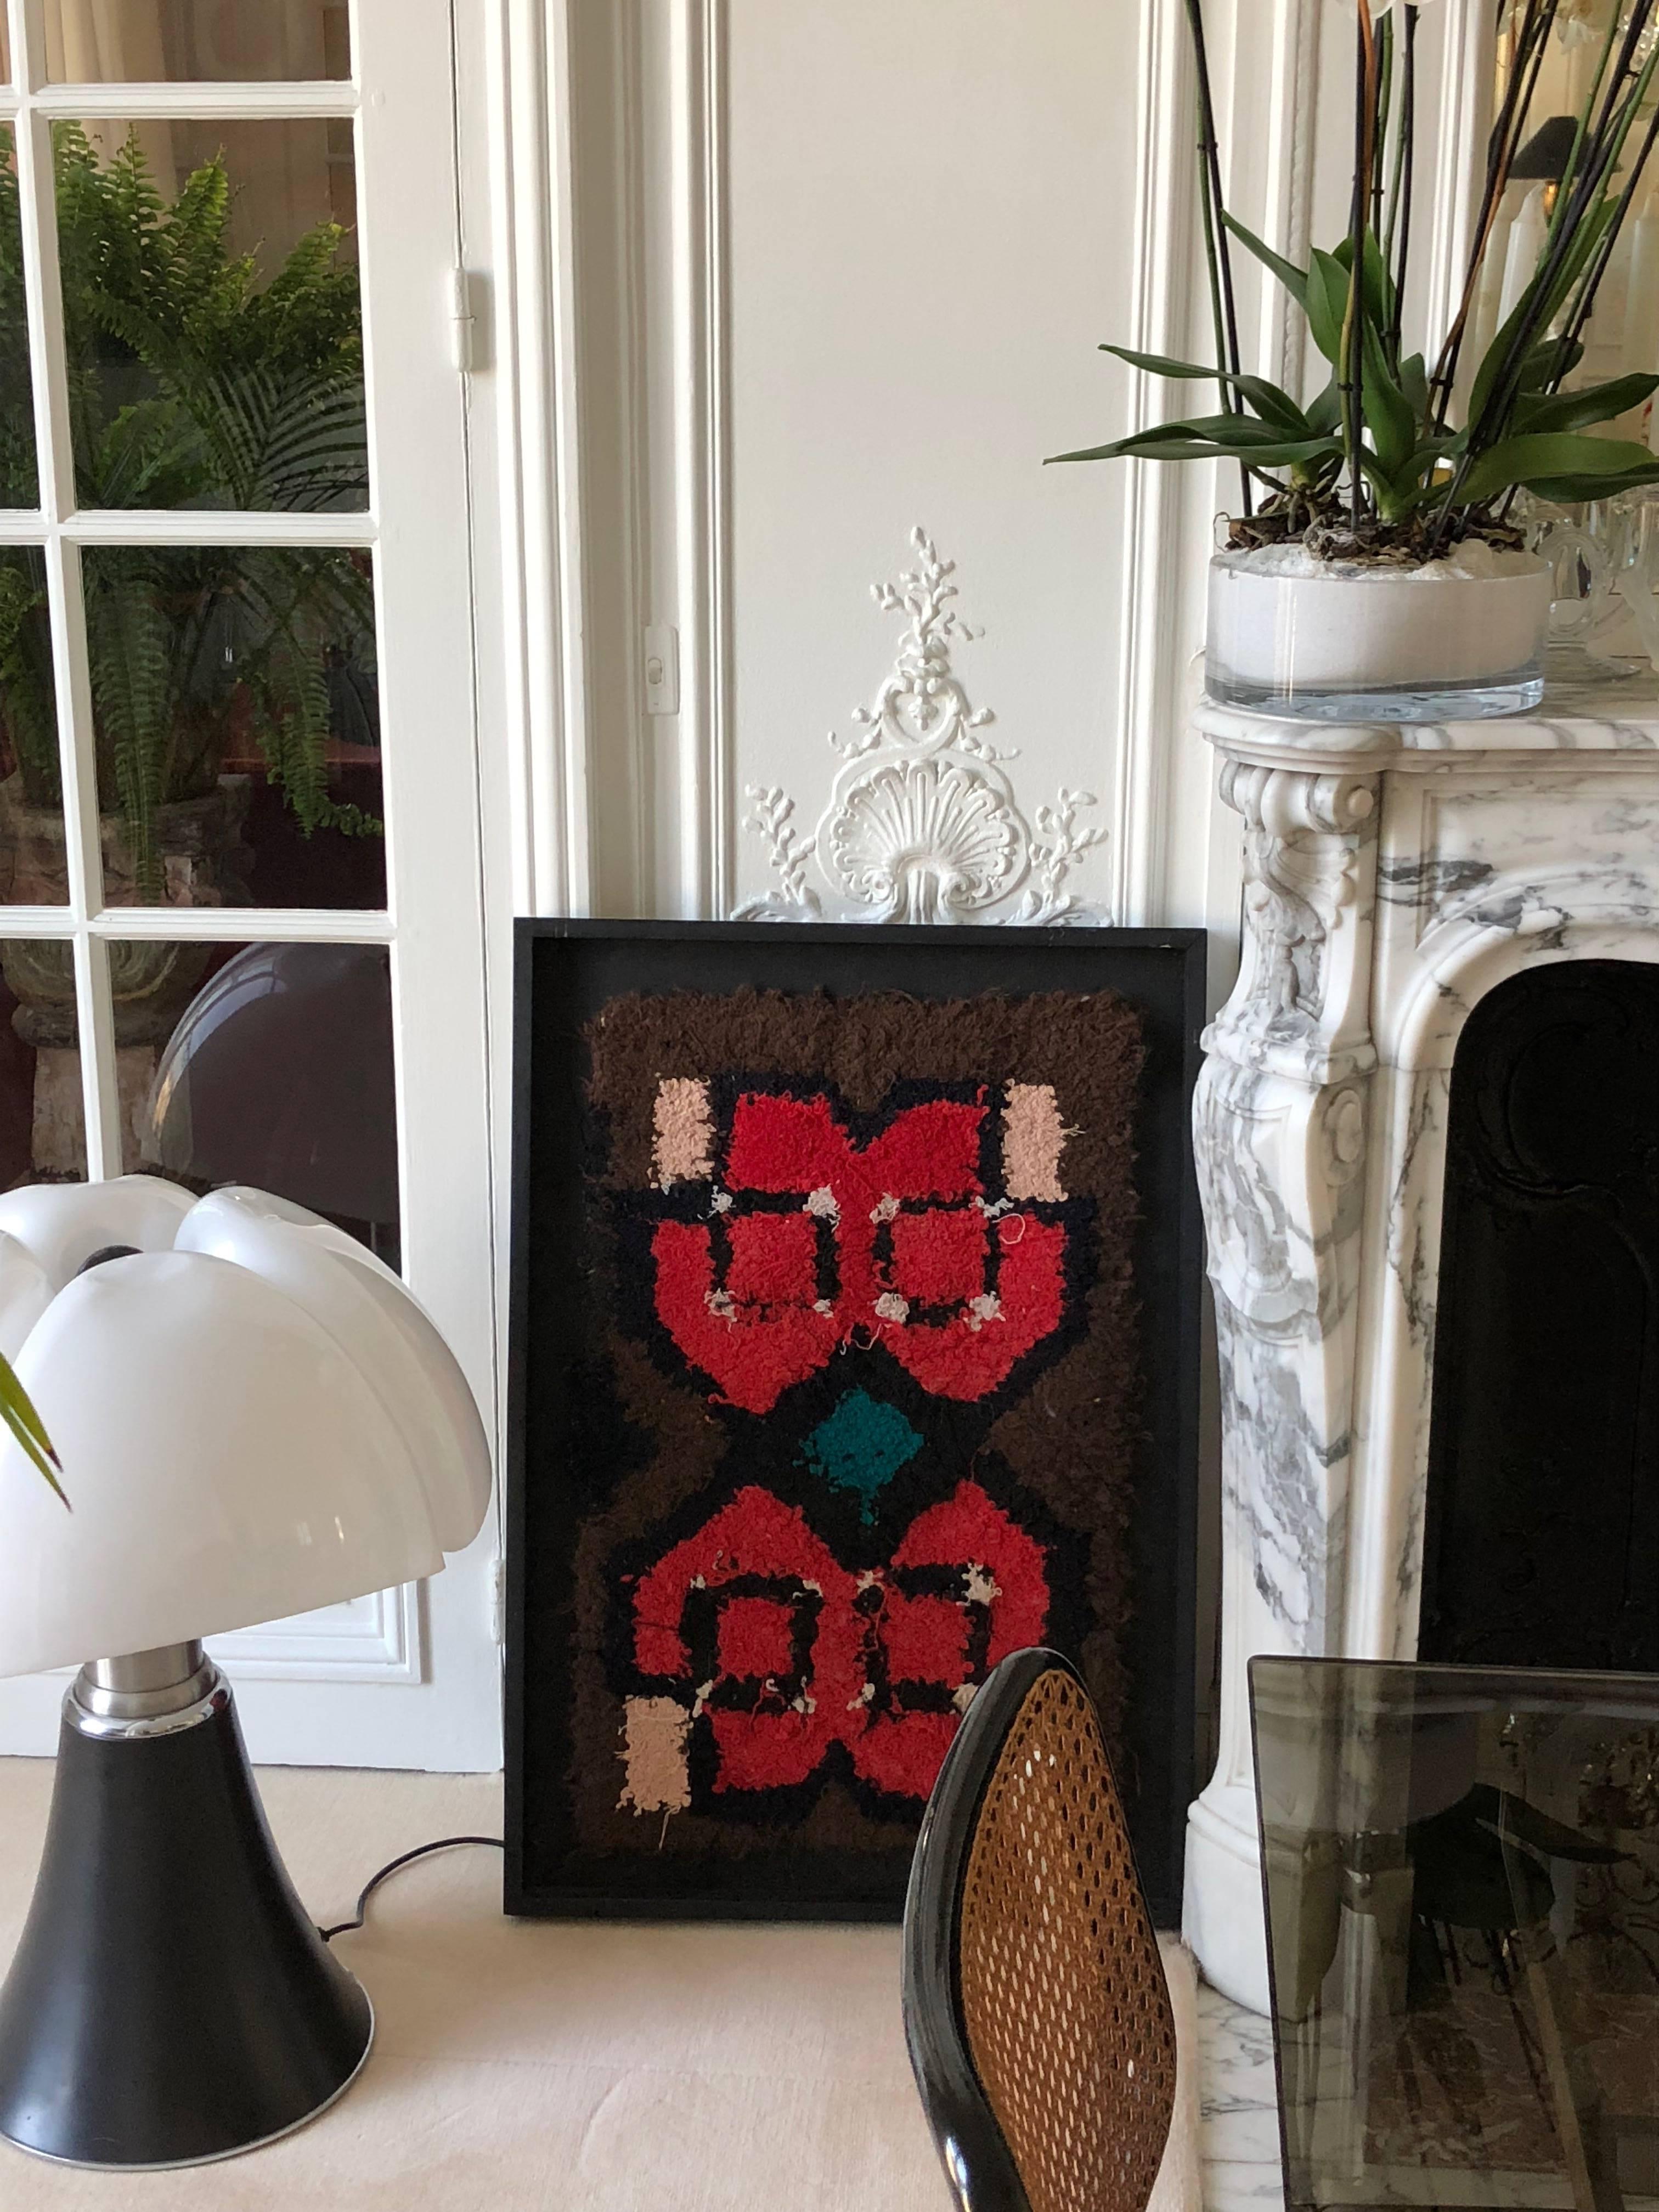 Berber tribal artwork handmade by women of the Atlas Mountains originally for domestic use, this tapestry finds its expression with iconic symbols. 

The dimensions are width 58 cm x height 85 cm (frame included).

Zindekh tapestries are the